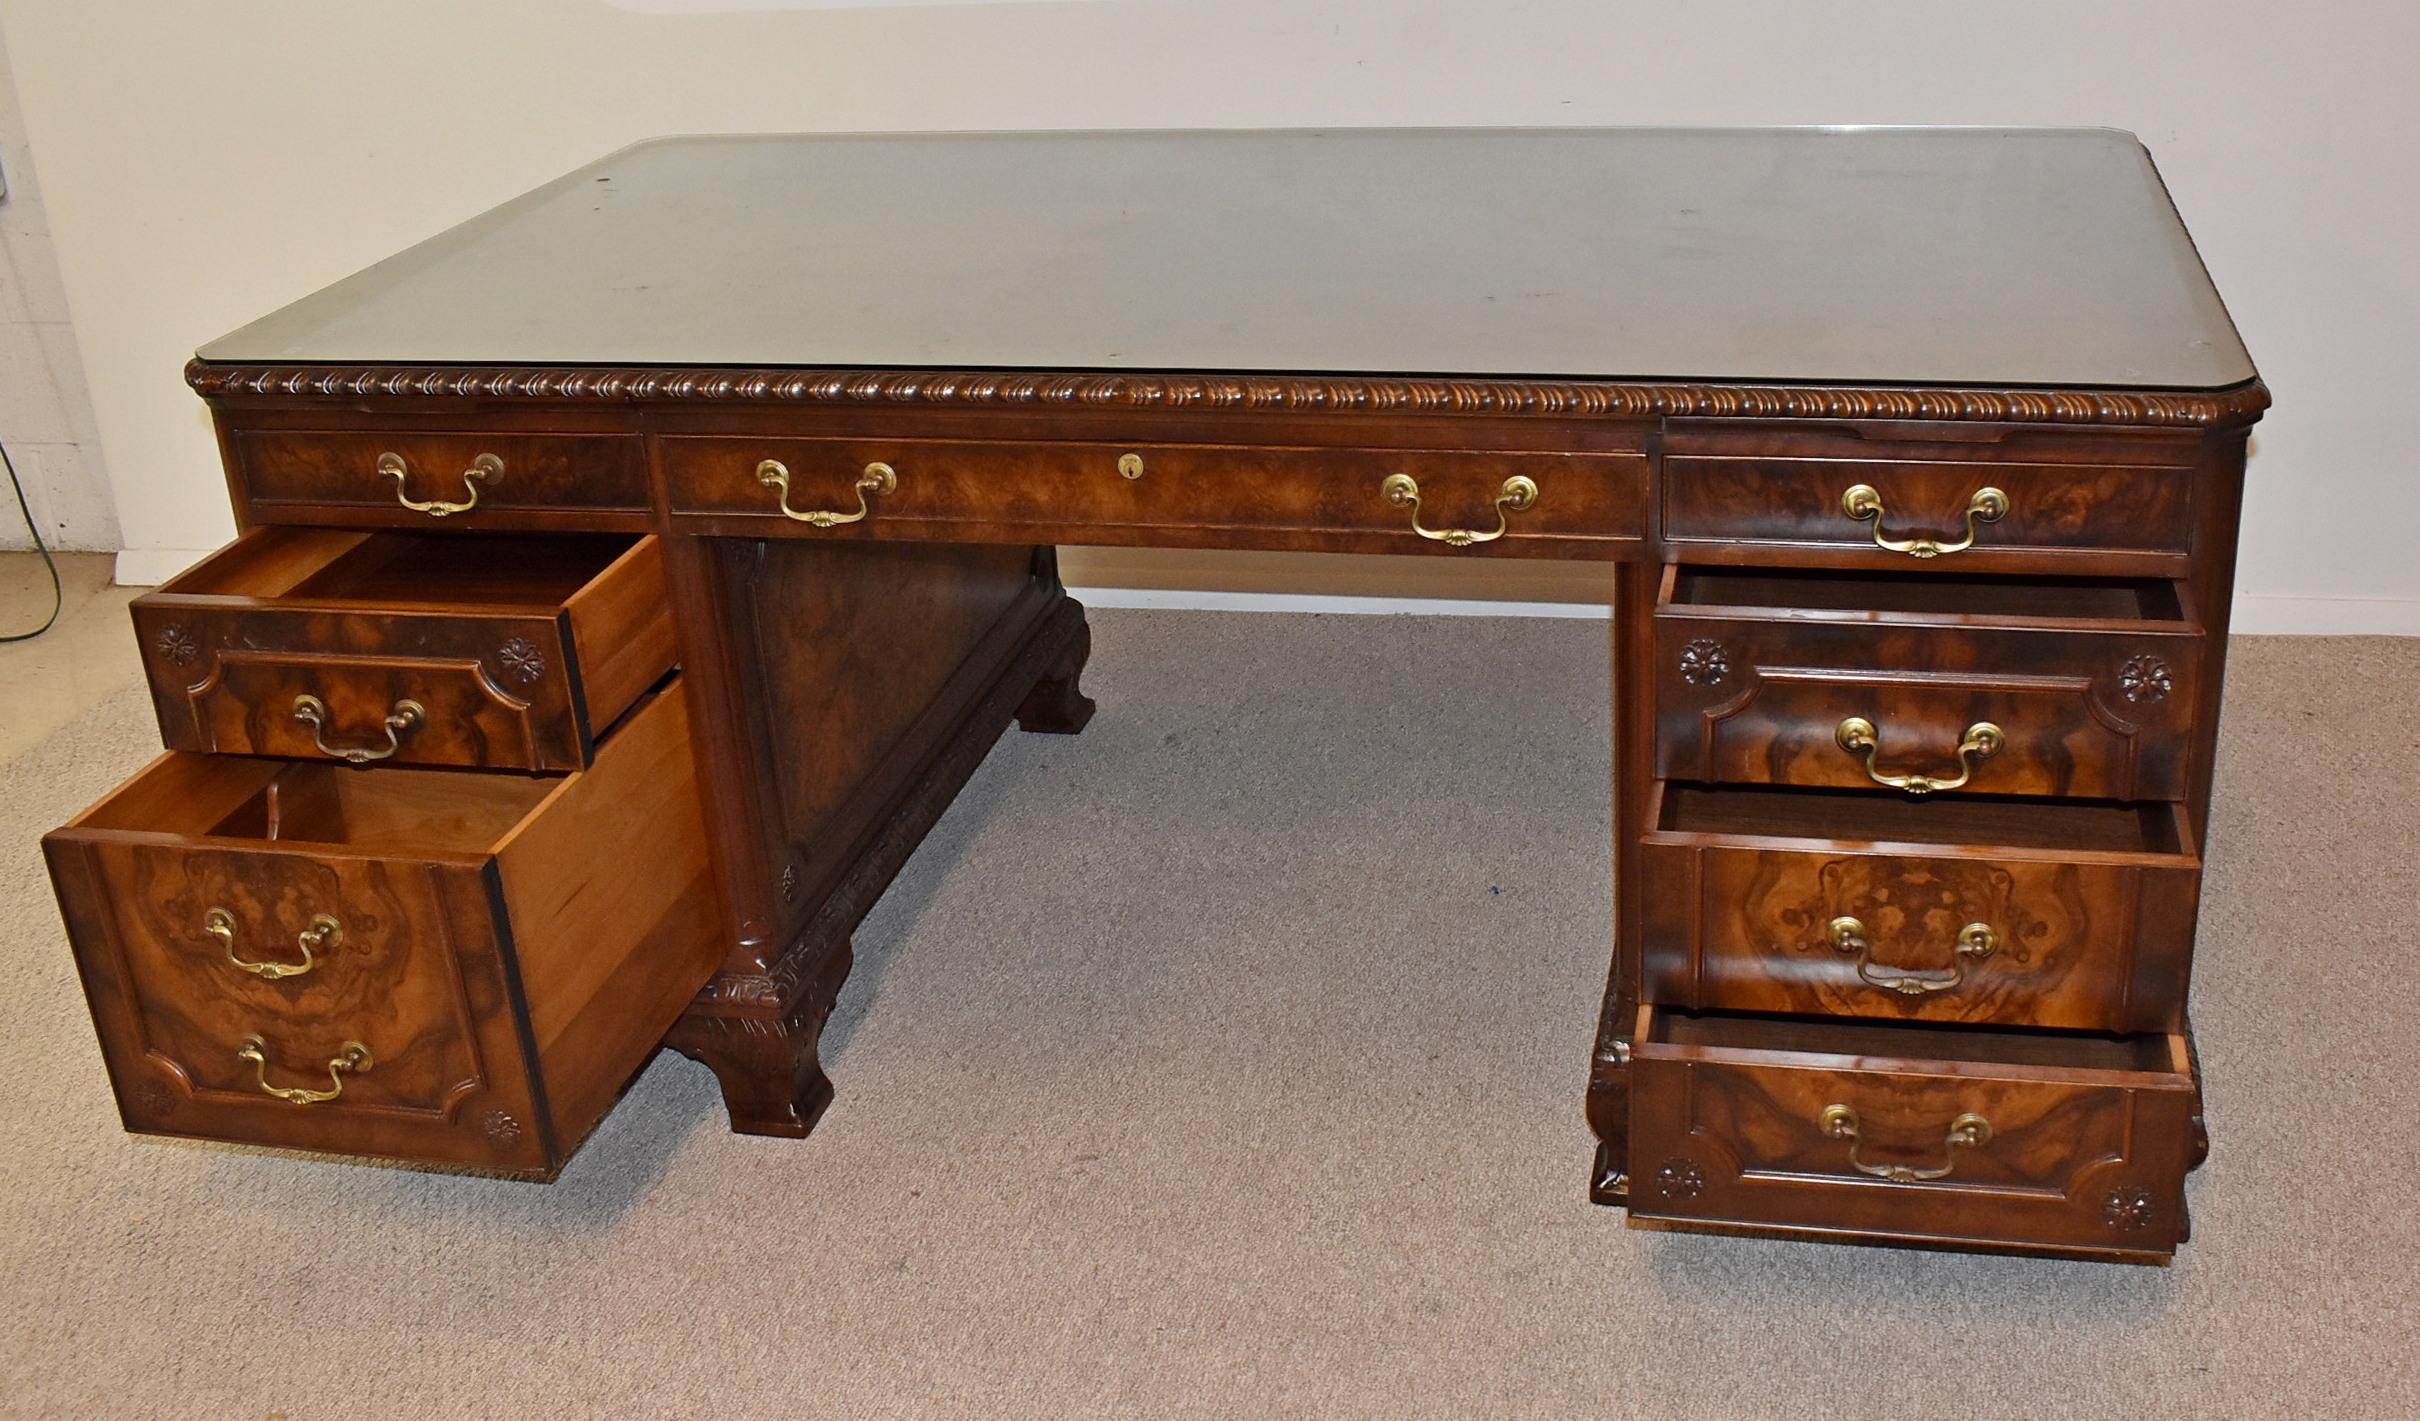 Vintage Walnut Executive Desk. Circa 1930's-1940's. Walnut and burlwood desk with original finish. Locking drawers with keys. Great Vintage condition with minor wear to the top. Manufactured by Wagner-Henzy-Fisher Office Furniture, Cleveland, Ohio